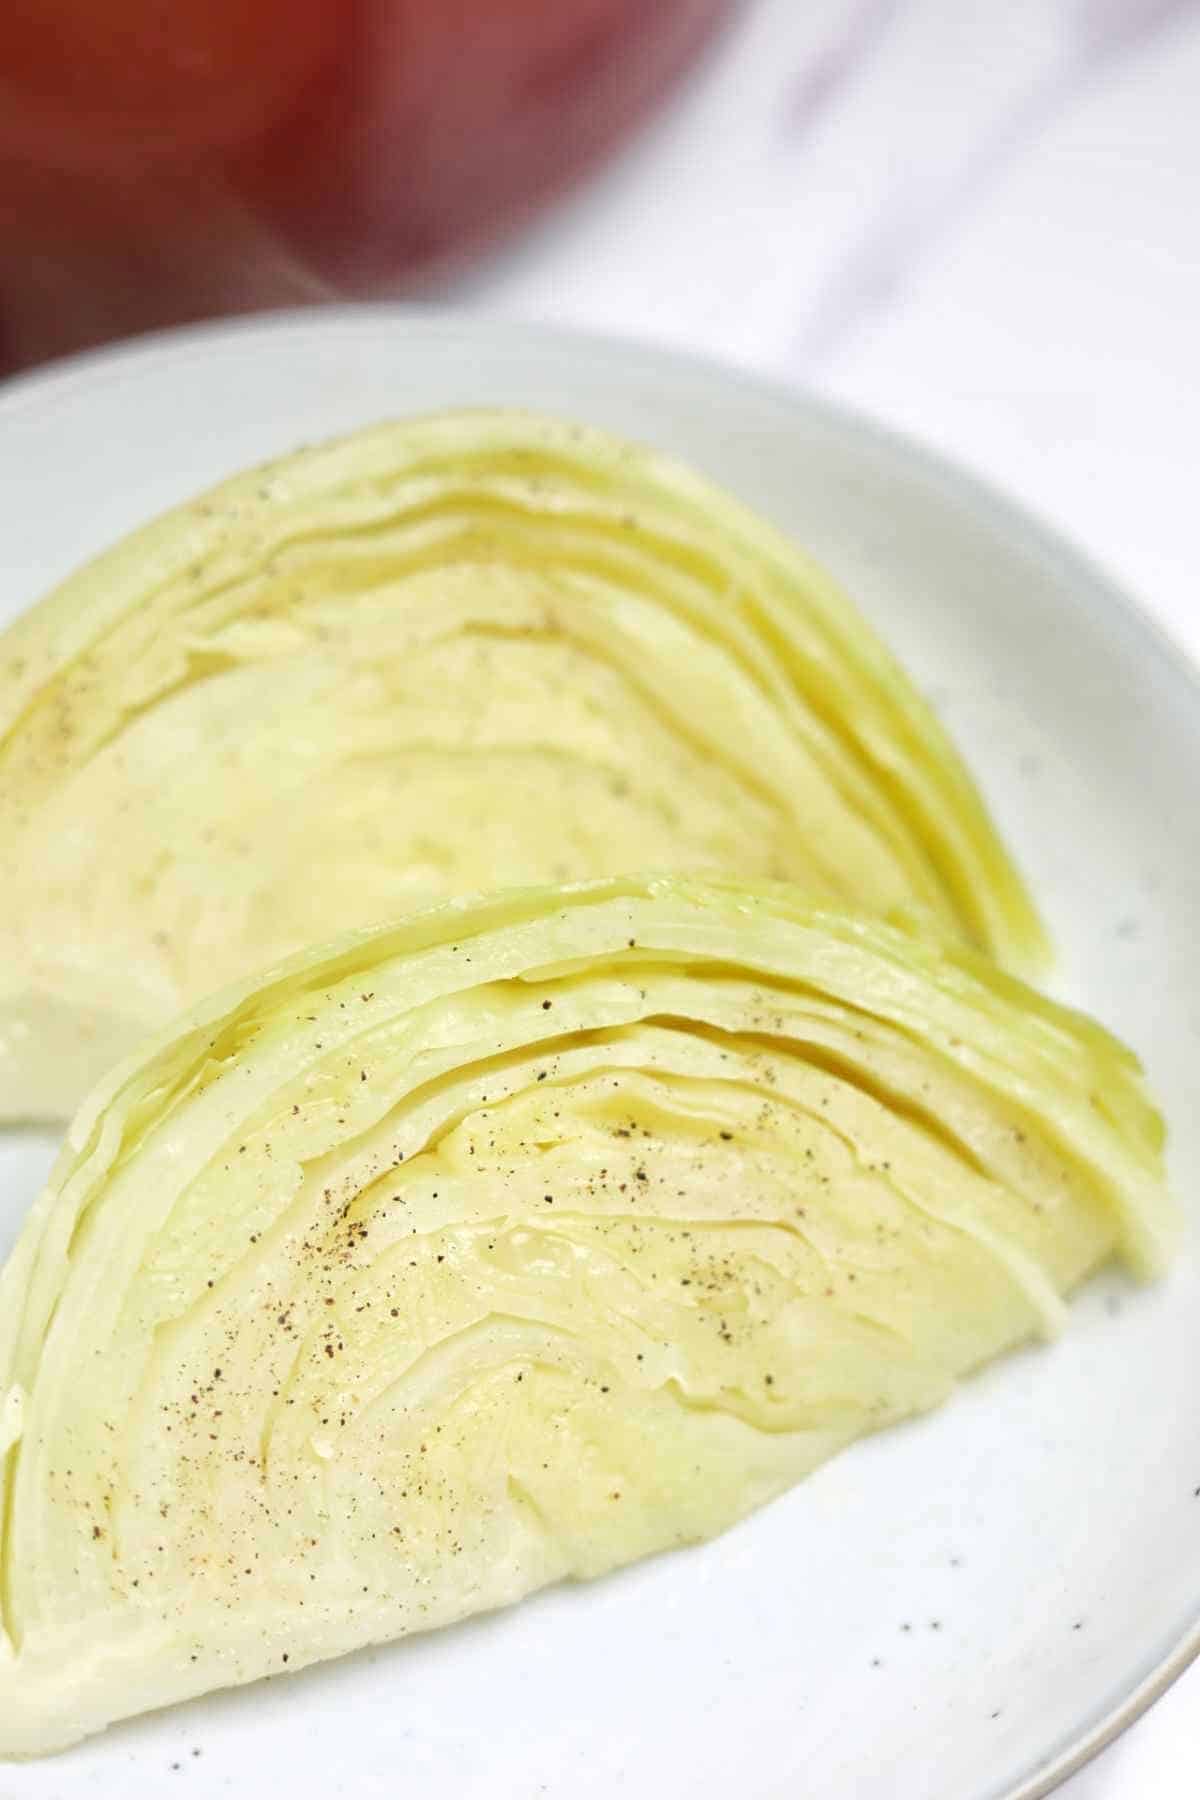 boiled cabbage served on a plate.